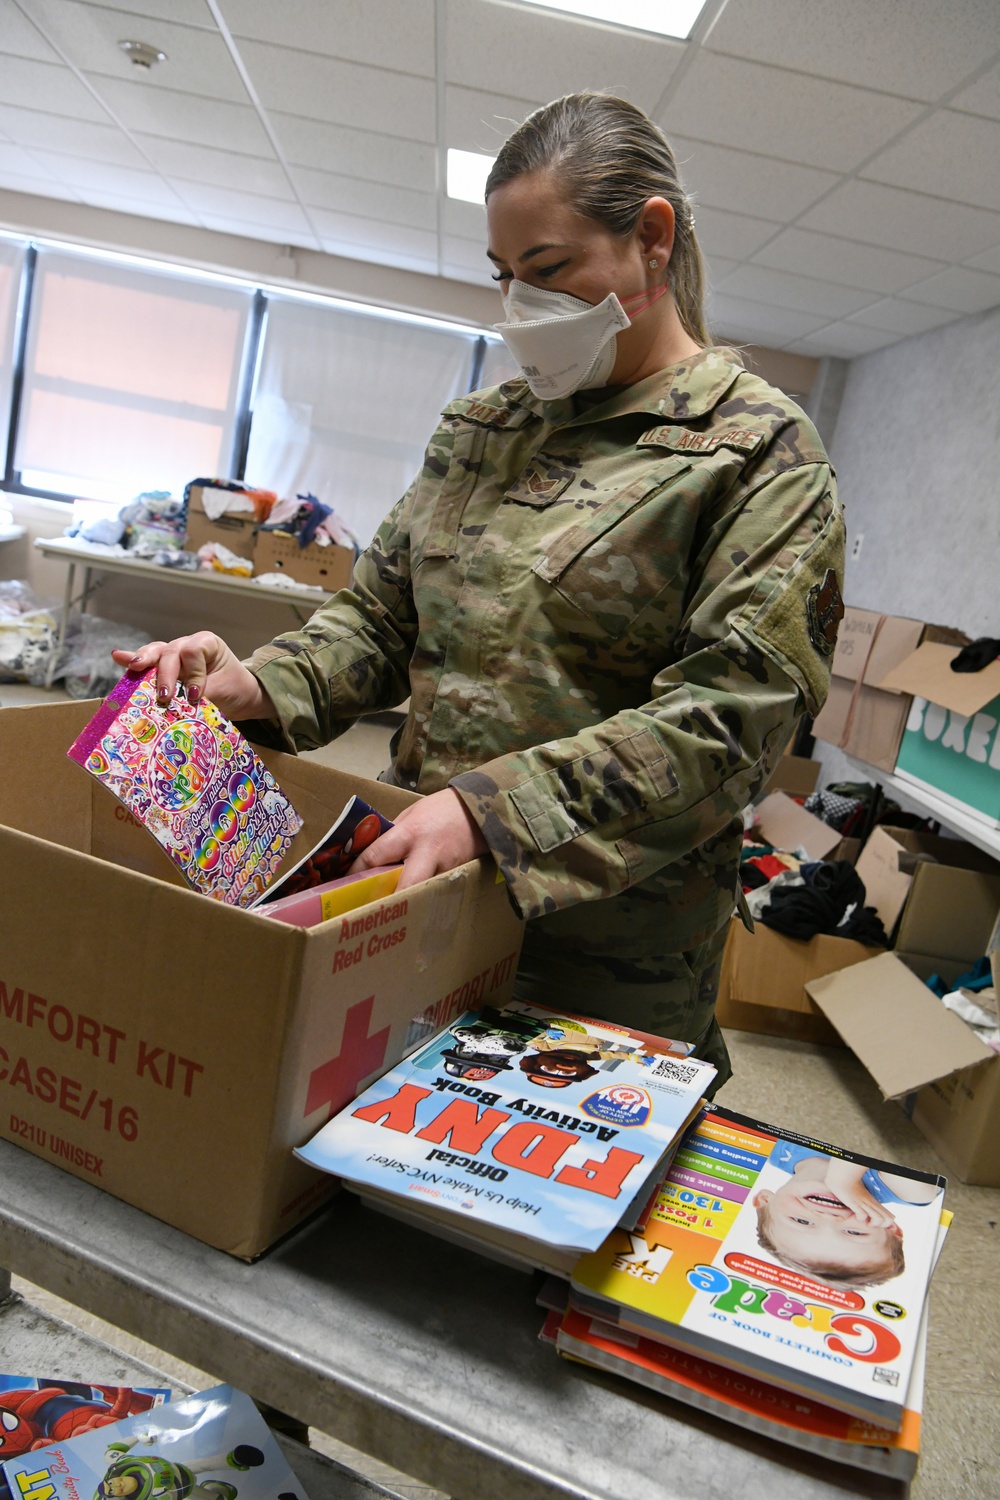 TF Liberty Airmen support medical isolation dormitory